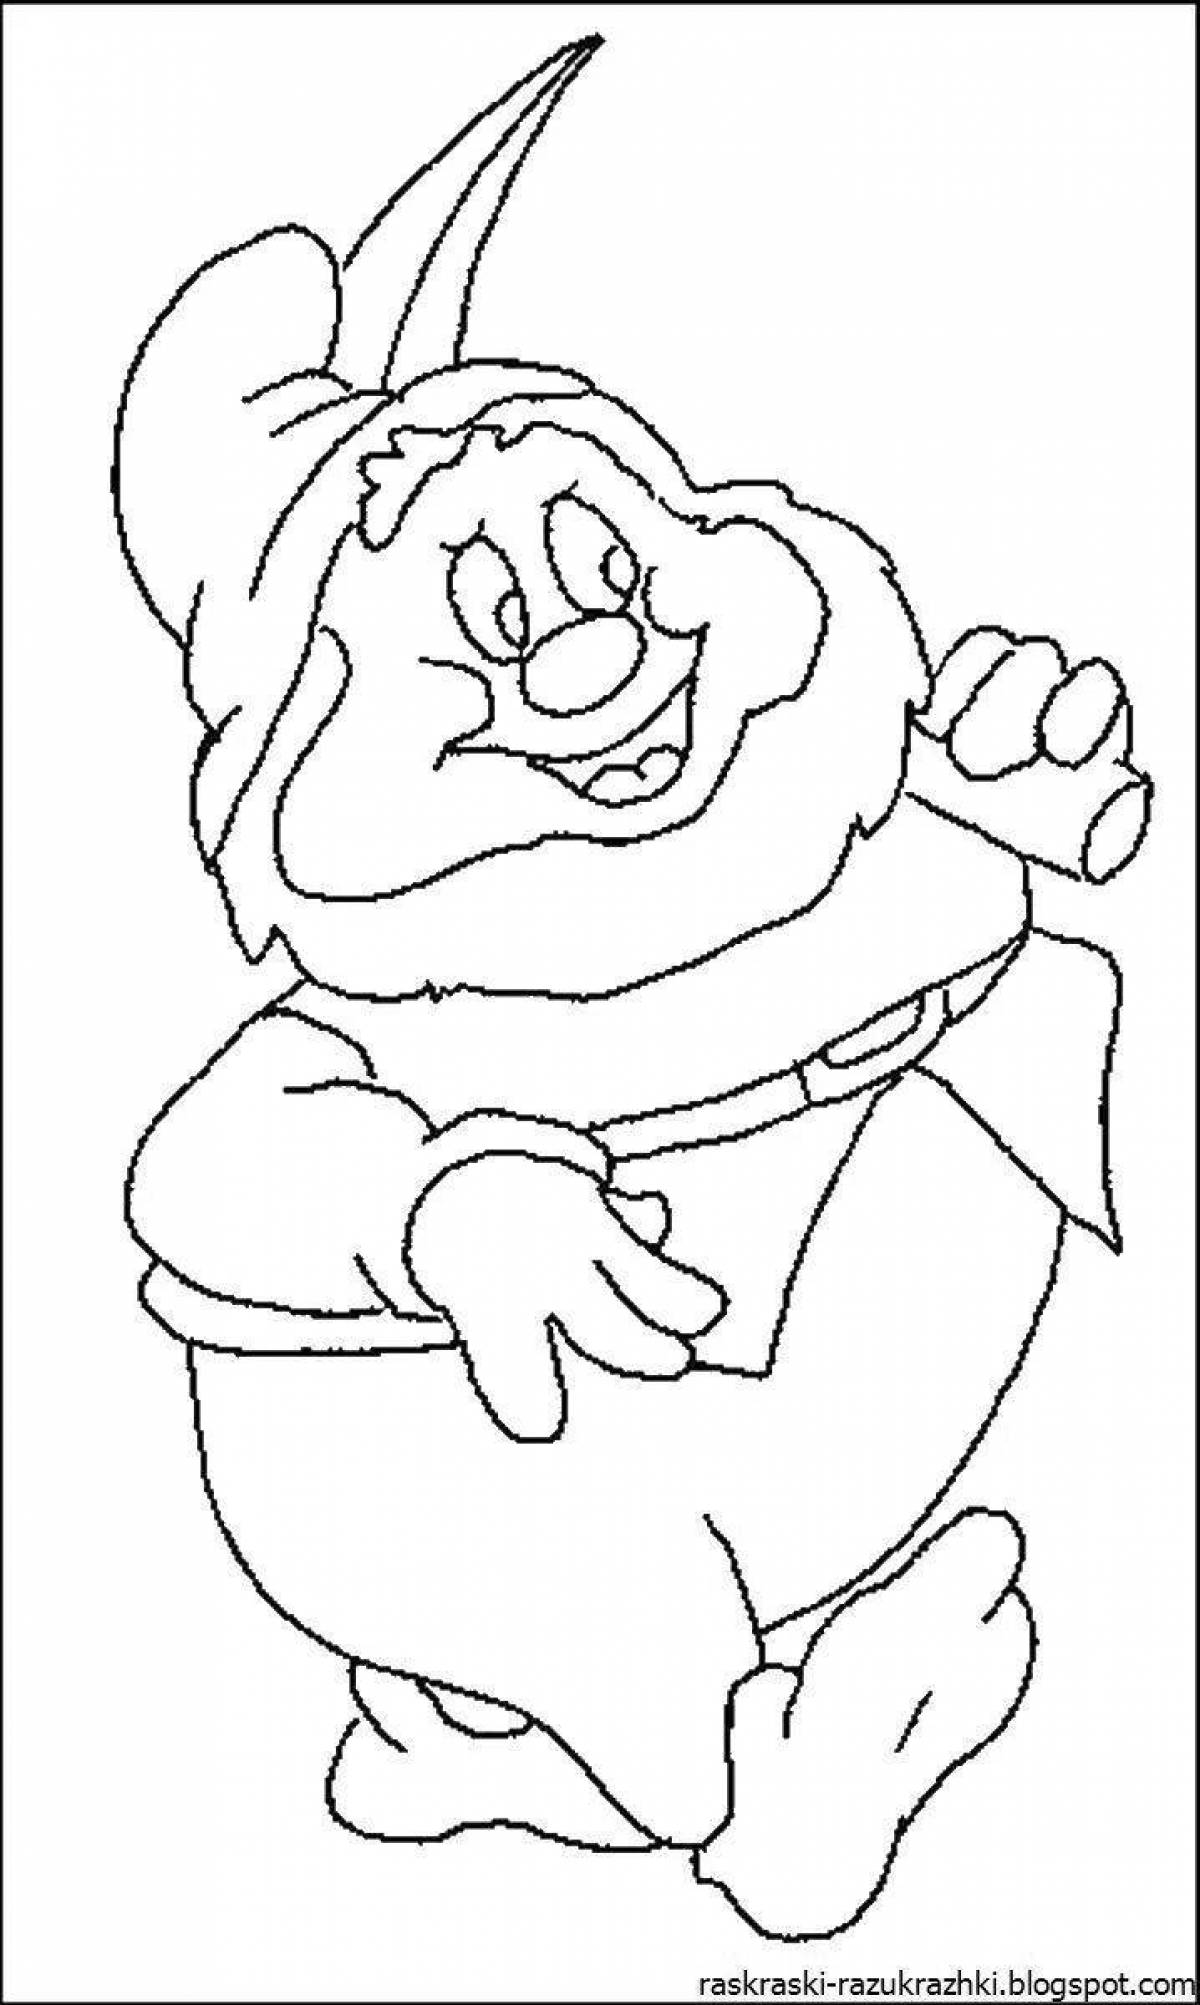 Great gnome coloring book for kids